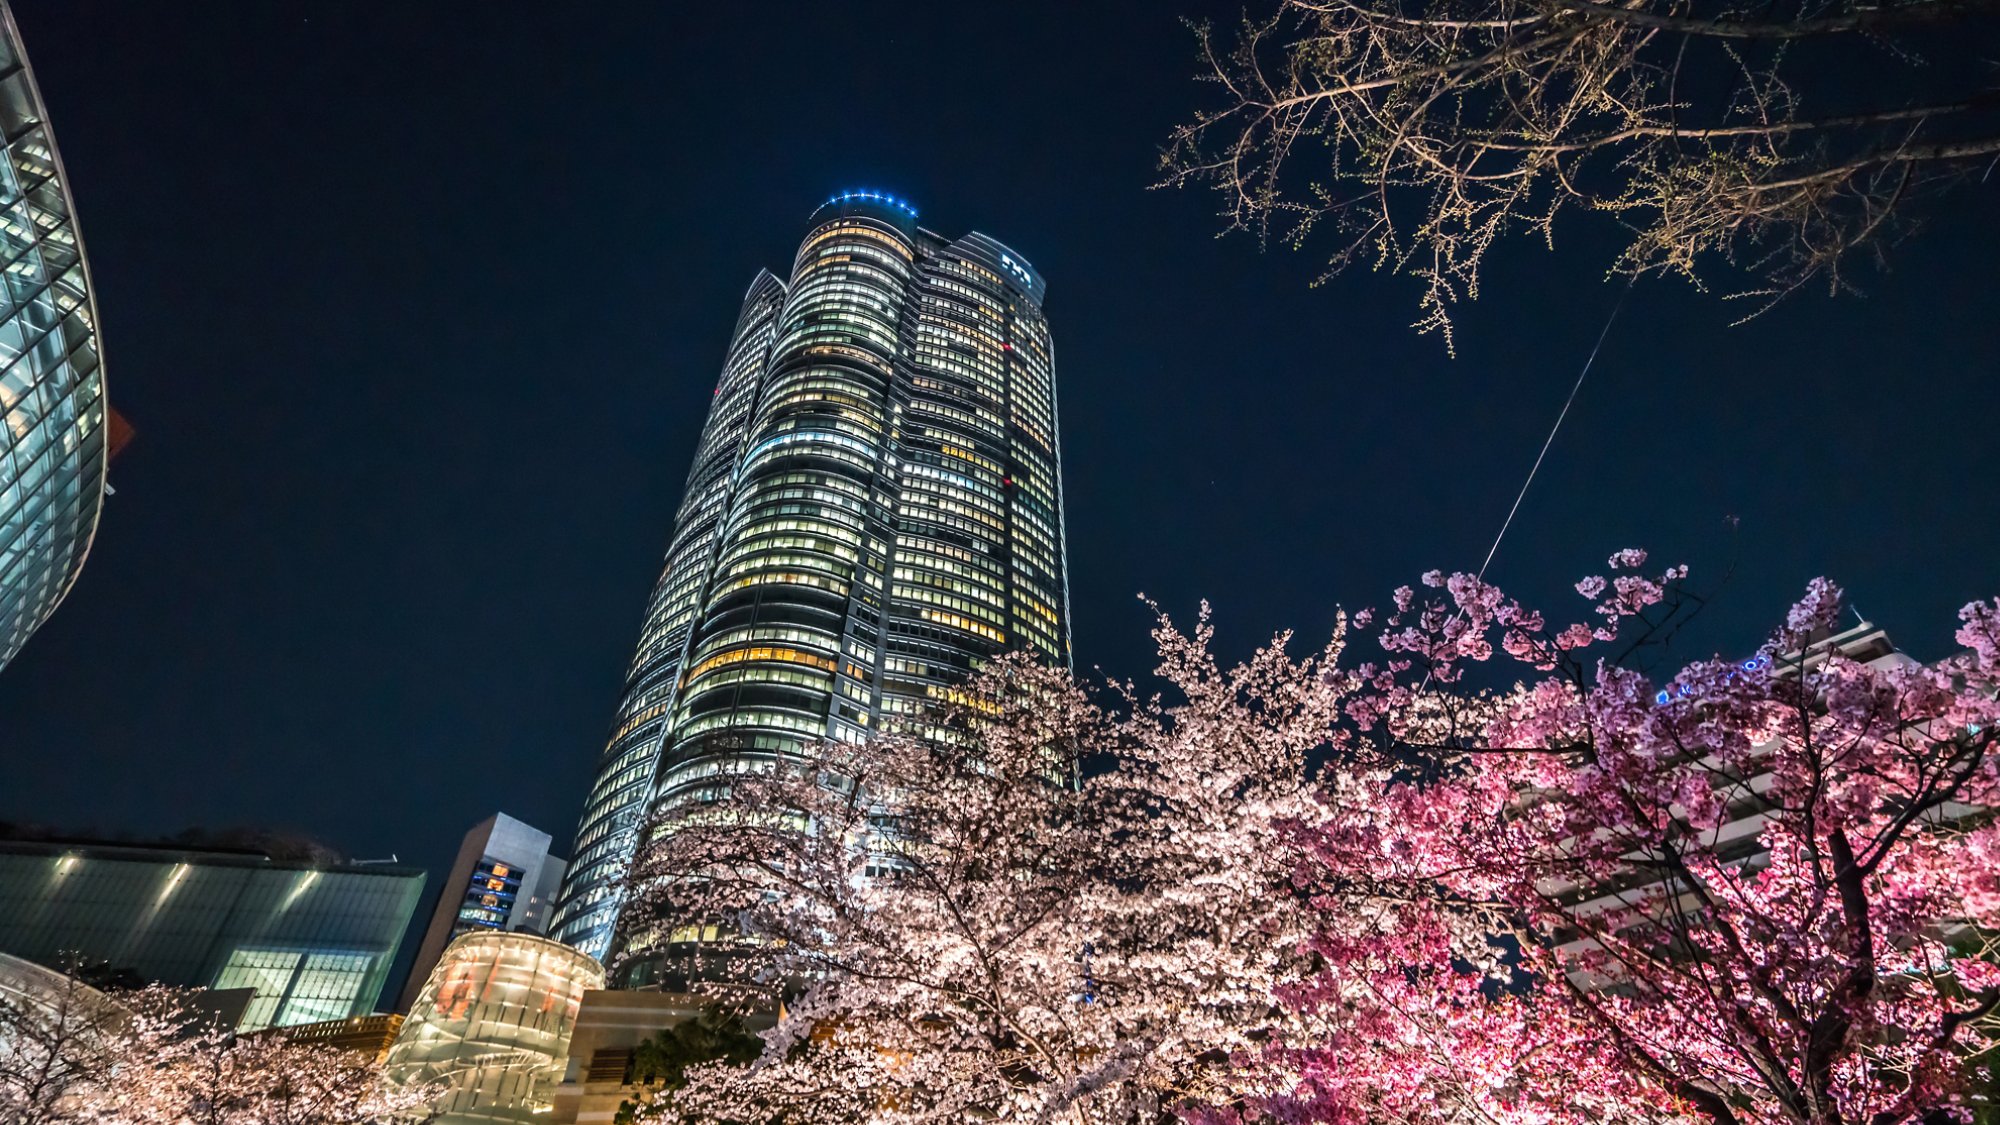 Tokyo Japan - March 27, 2019: Cherry blossoms at night, Roppongi Hills Mori Tower